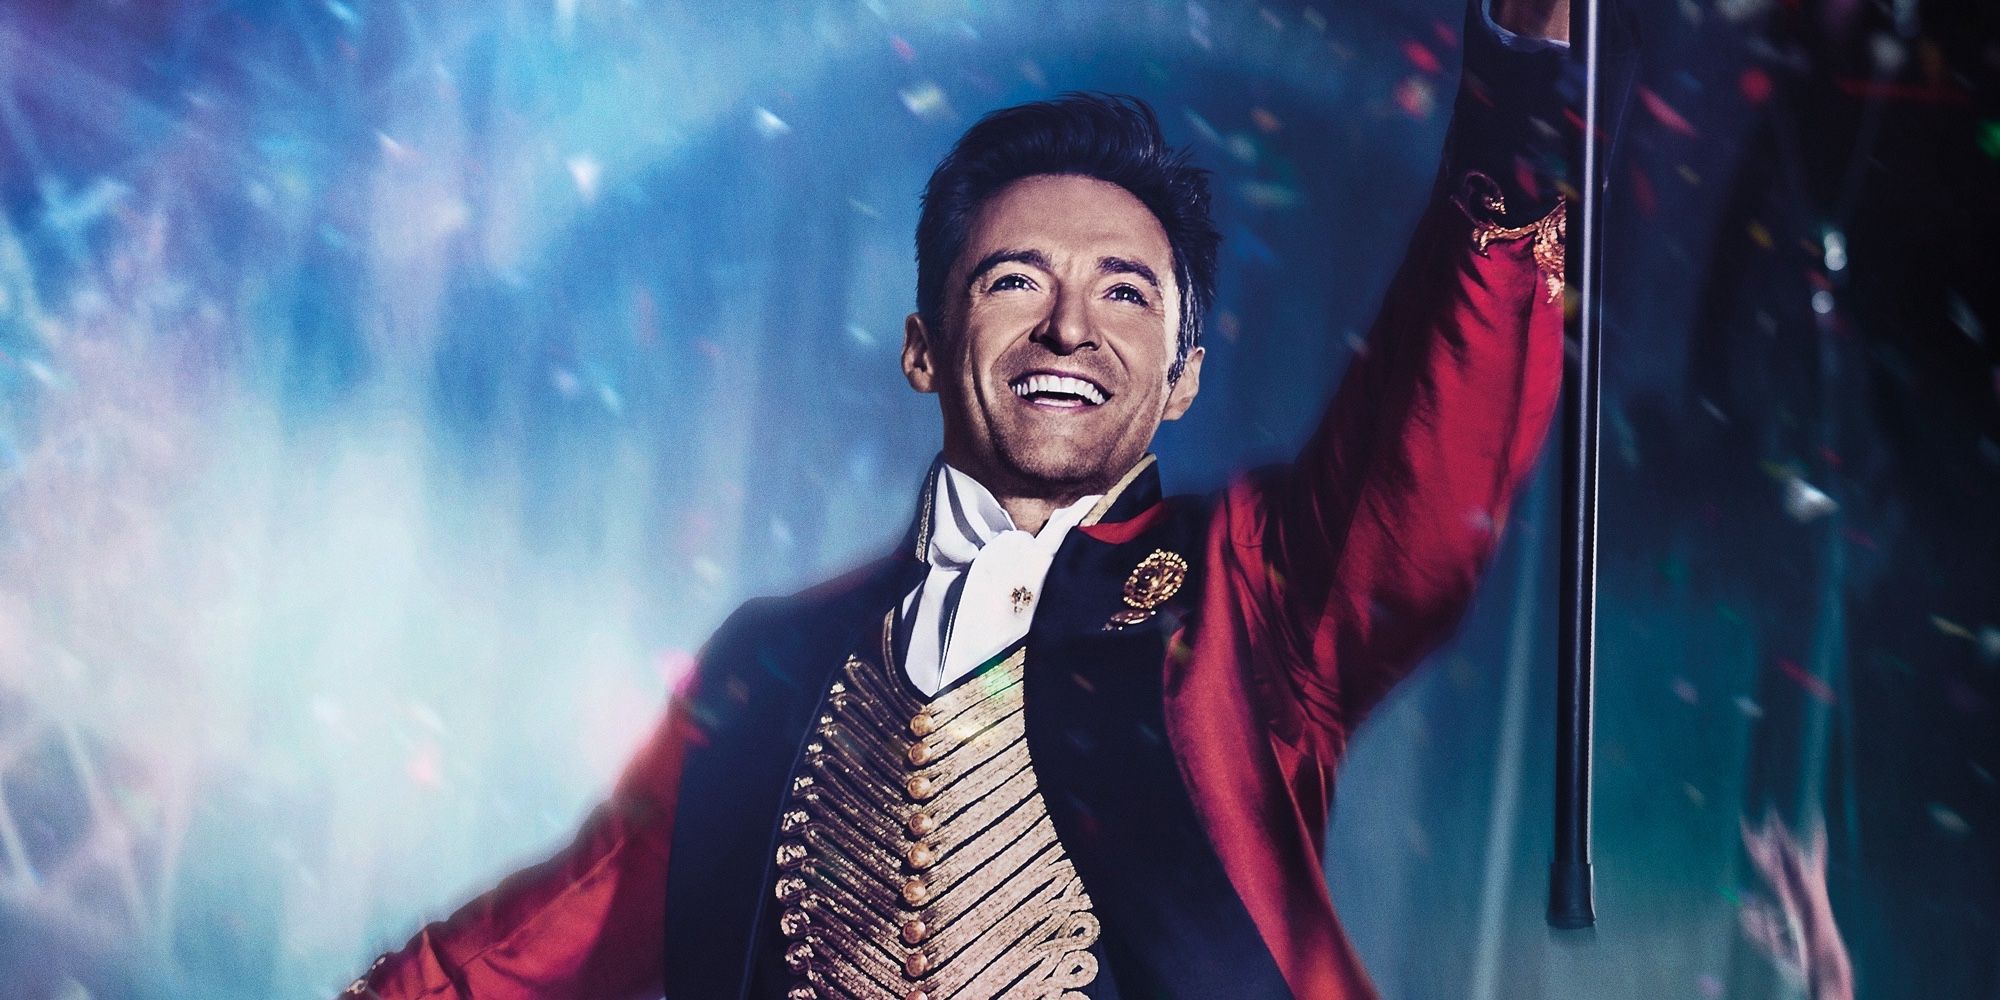 Hugh Jackman in his red coat as PT Barnum in The Greatest Showman poster